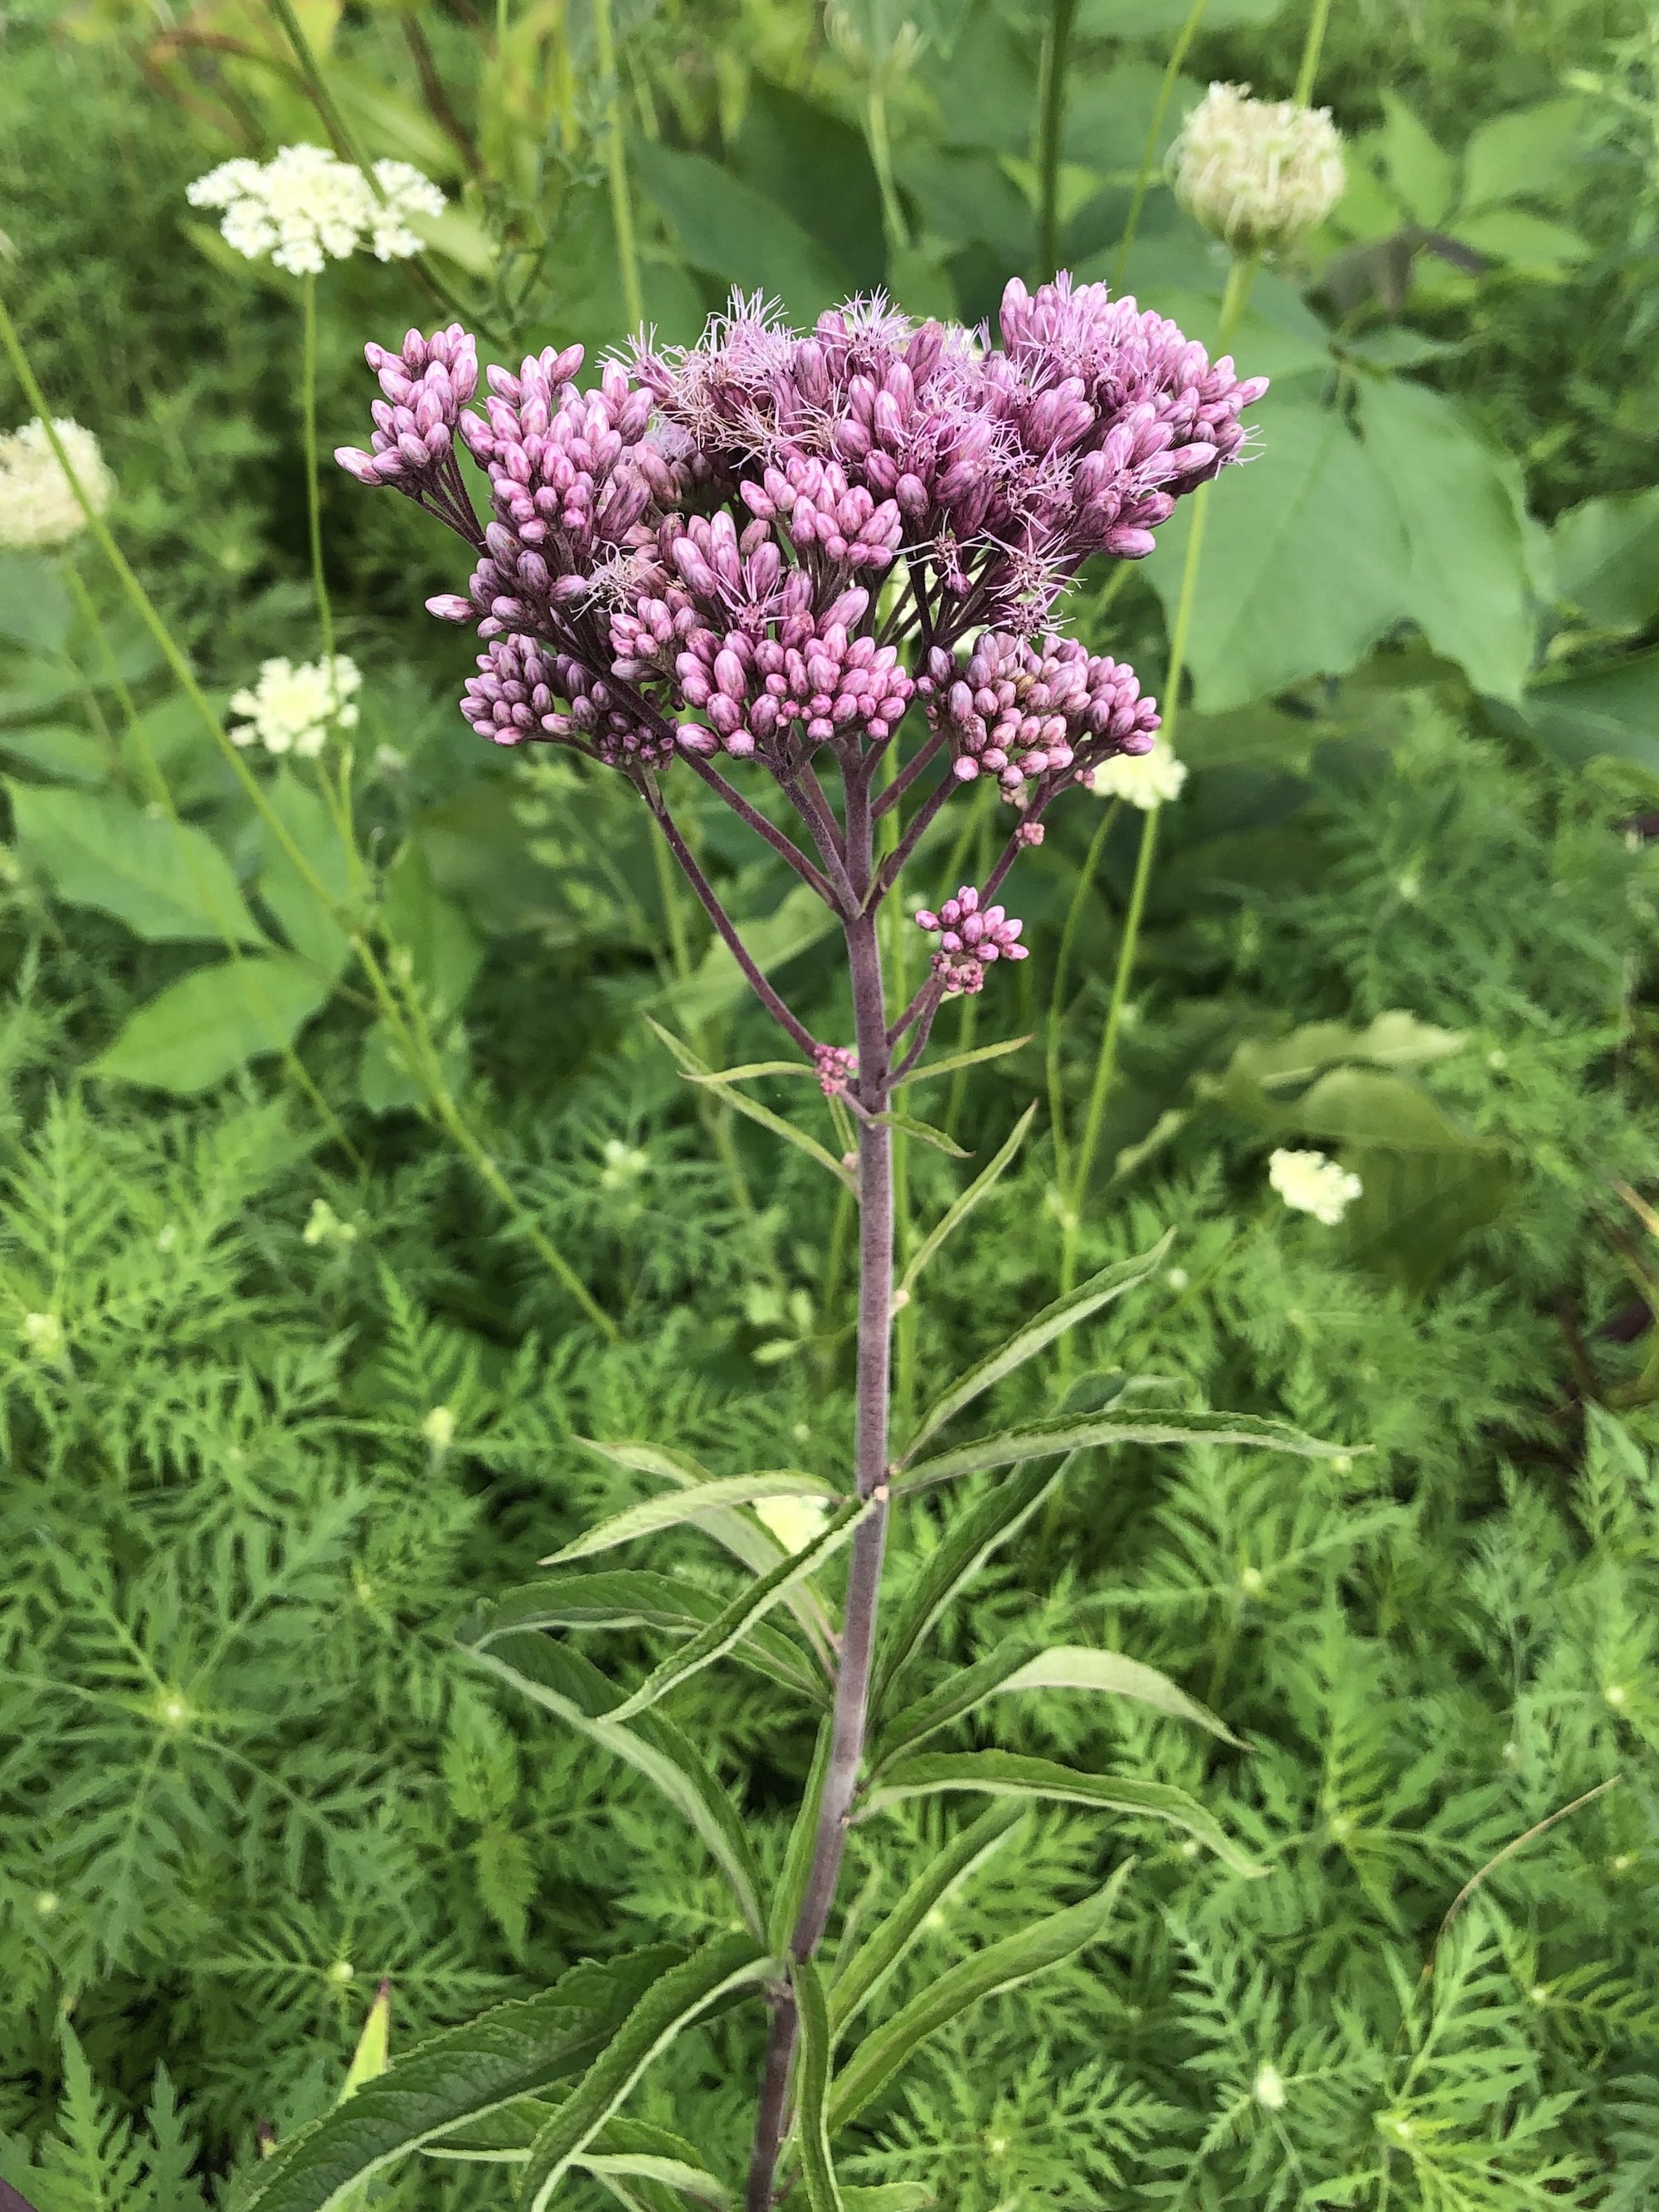 Spotted Joe-Pye Weed on shore of Vilas Park lagoon in Madison, Wisconsin on July 29, 2021.